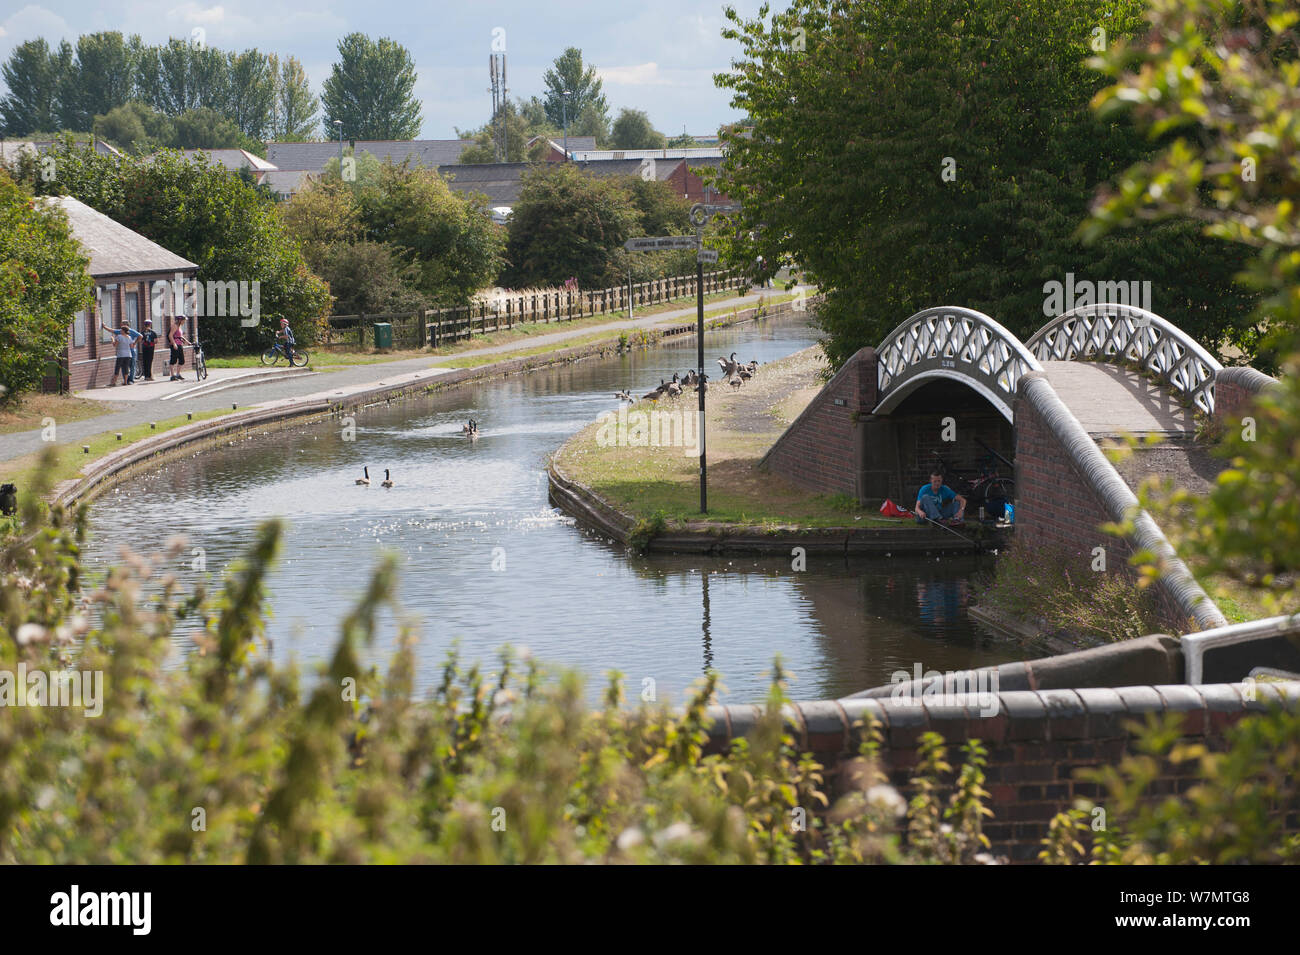 People fishing in canals near Bumble Hole Nature Reserve, Sandwell, West Midlands, July 2011 Stock Photo